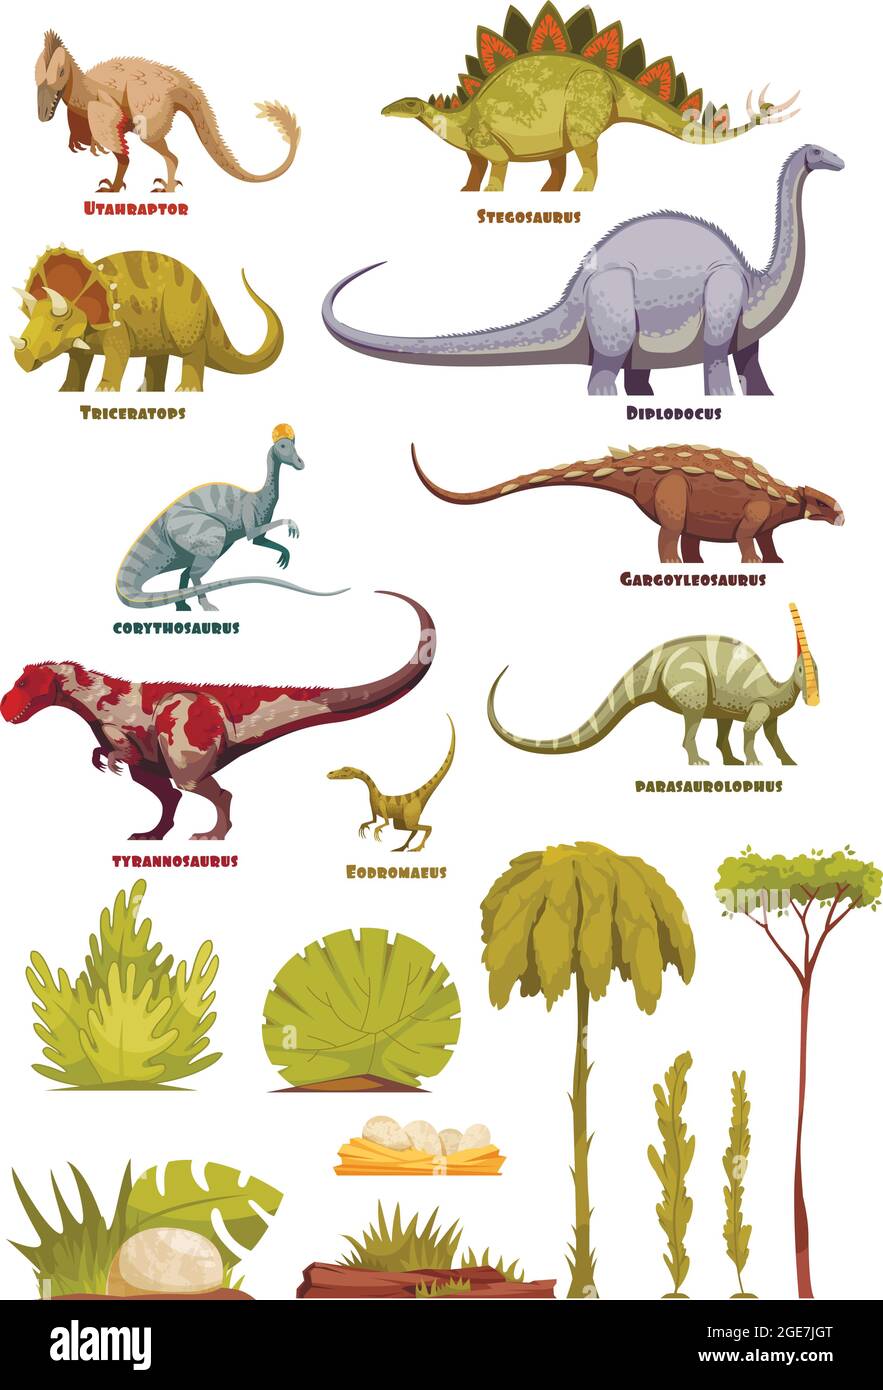 different-types-of-dinosaurs-in-cartoon-style-with-name-of-class-and-flora-landscape-elements